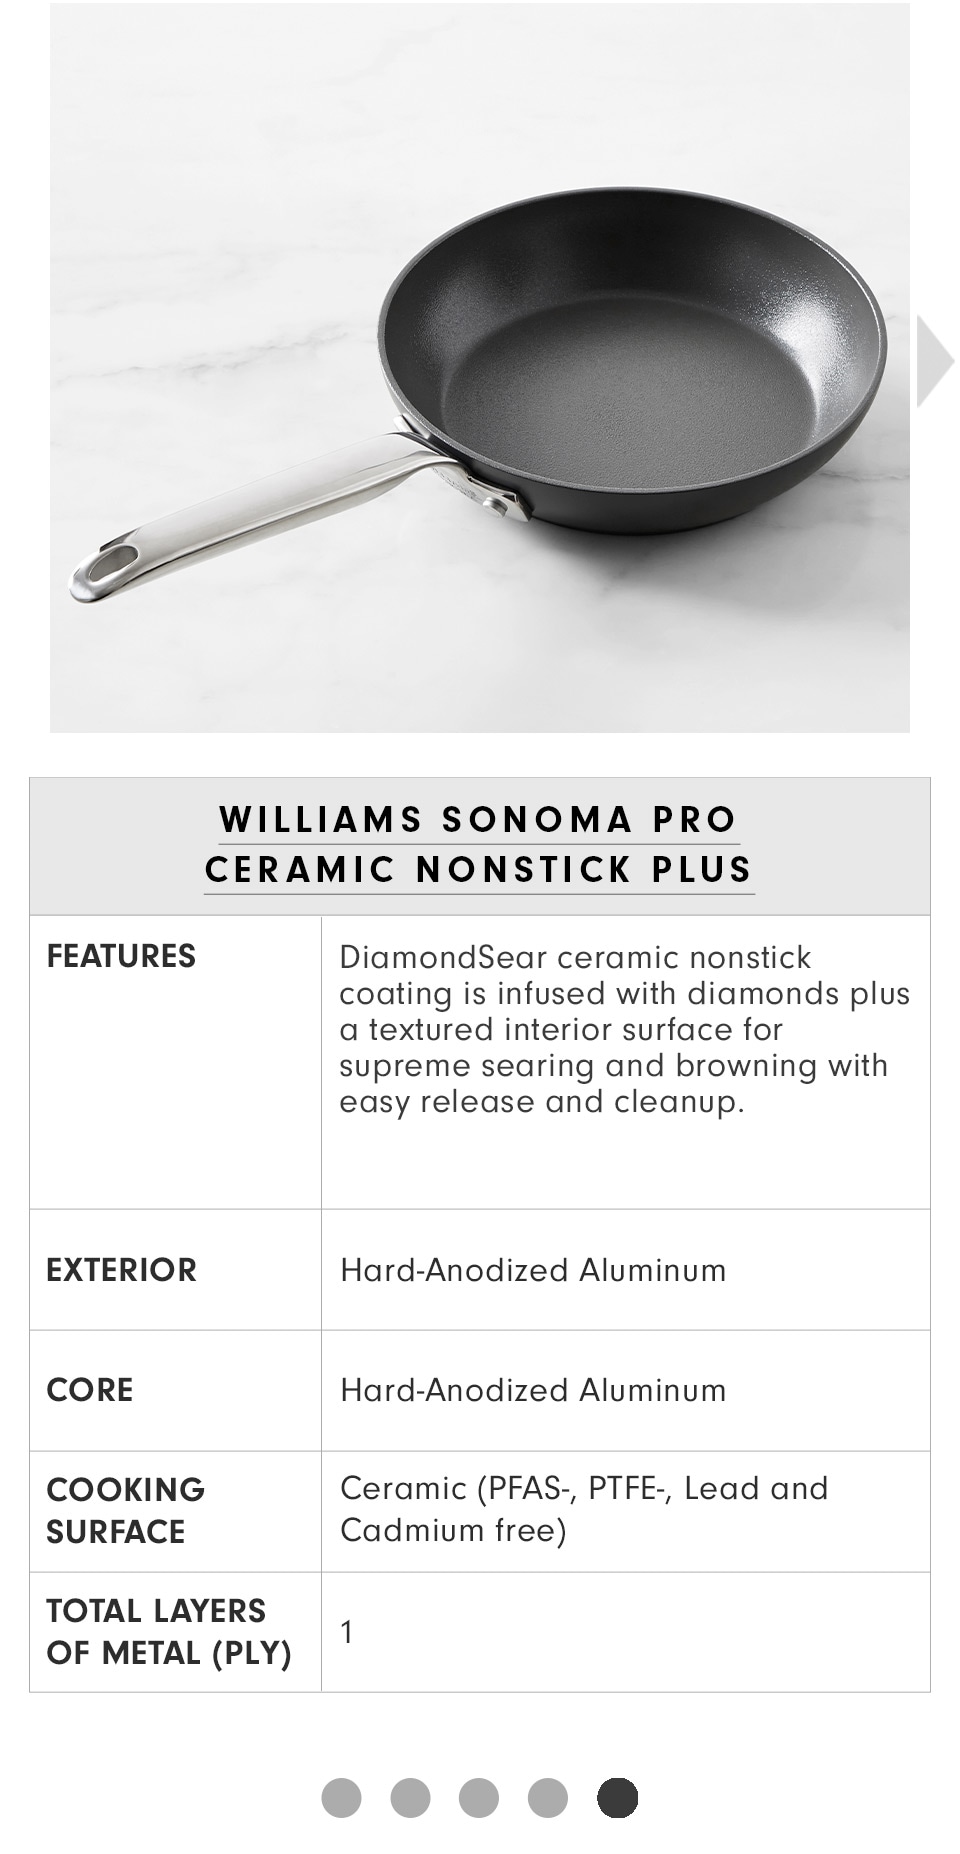 The GreenPan Lima Healthy Ceramic Nonstick Skillet Is 45% Off at